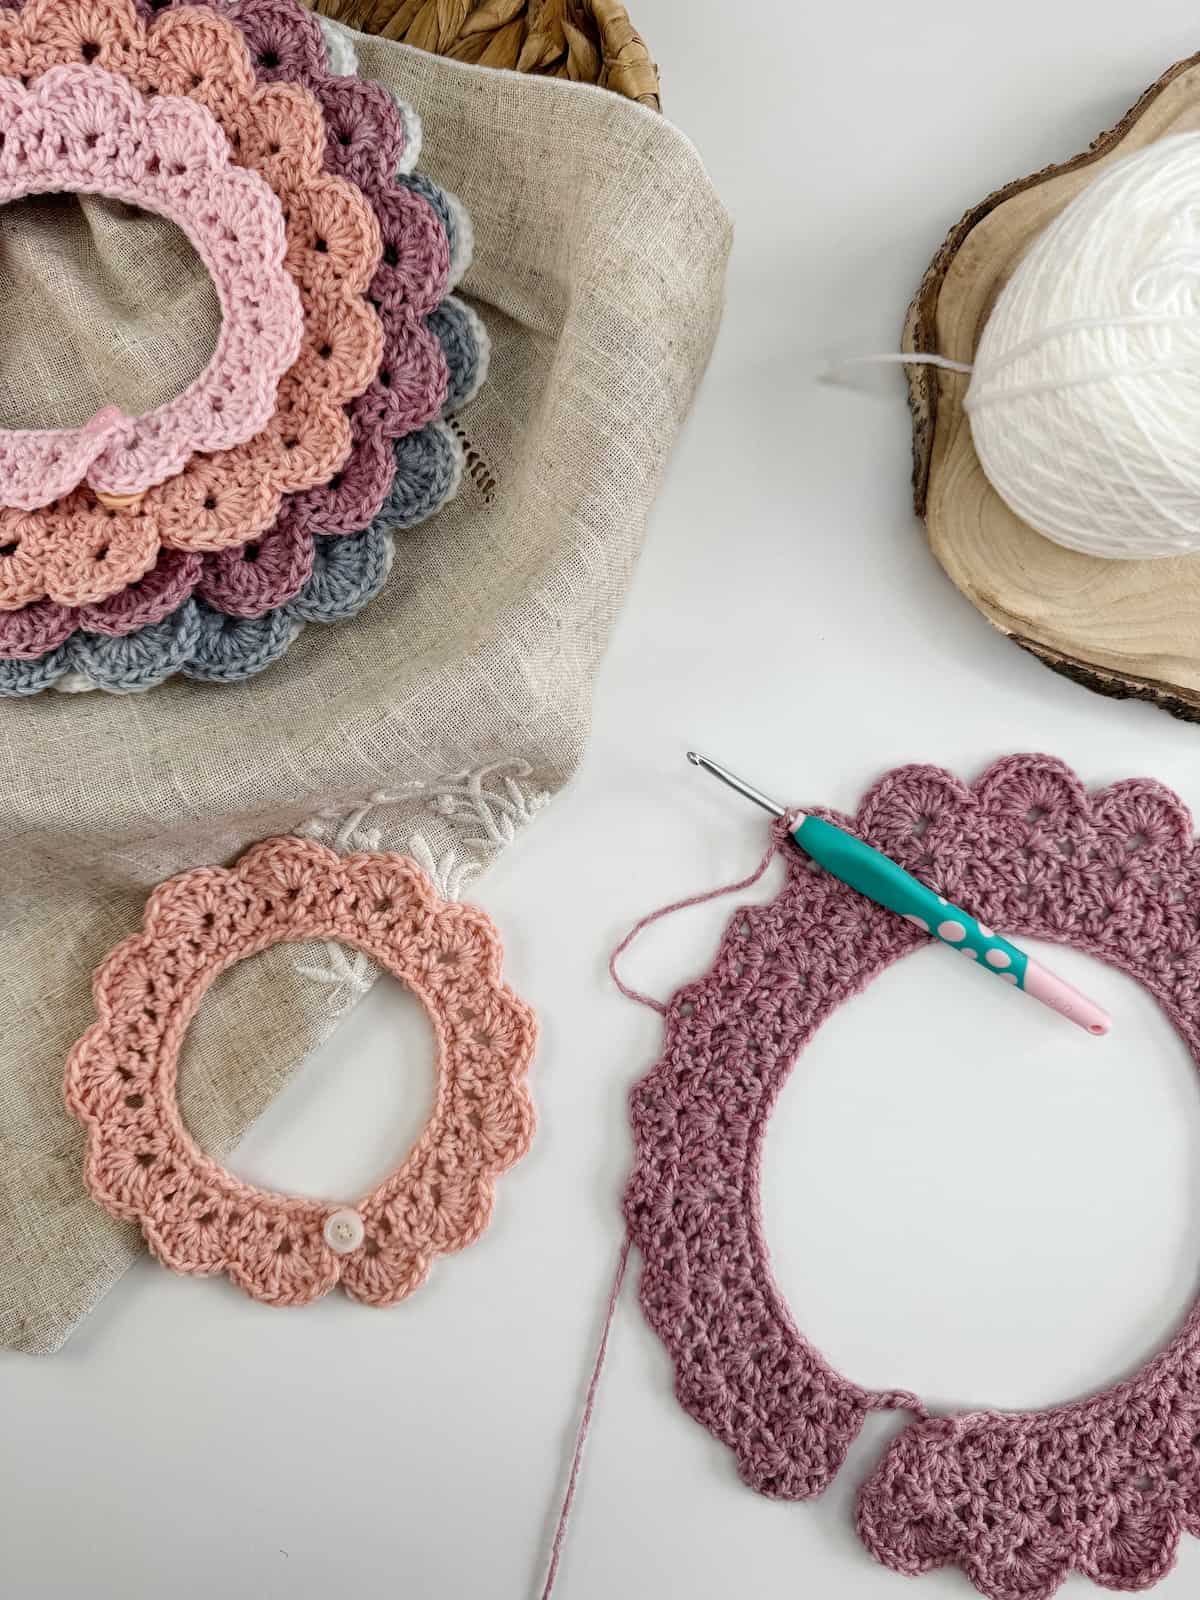 A crochet collar being made with a crochet hook and a yarn ball.